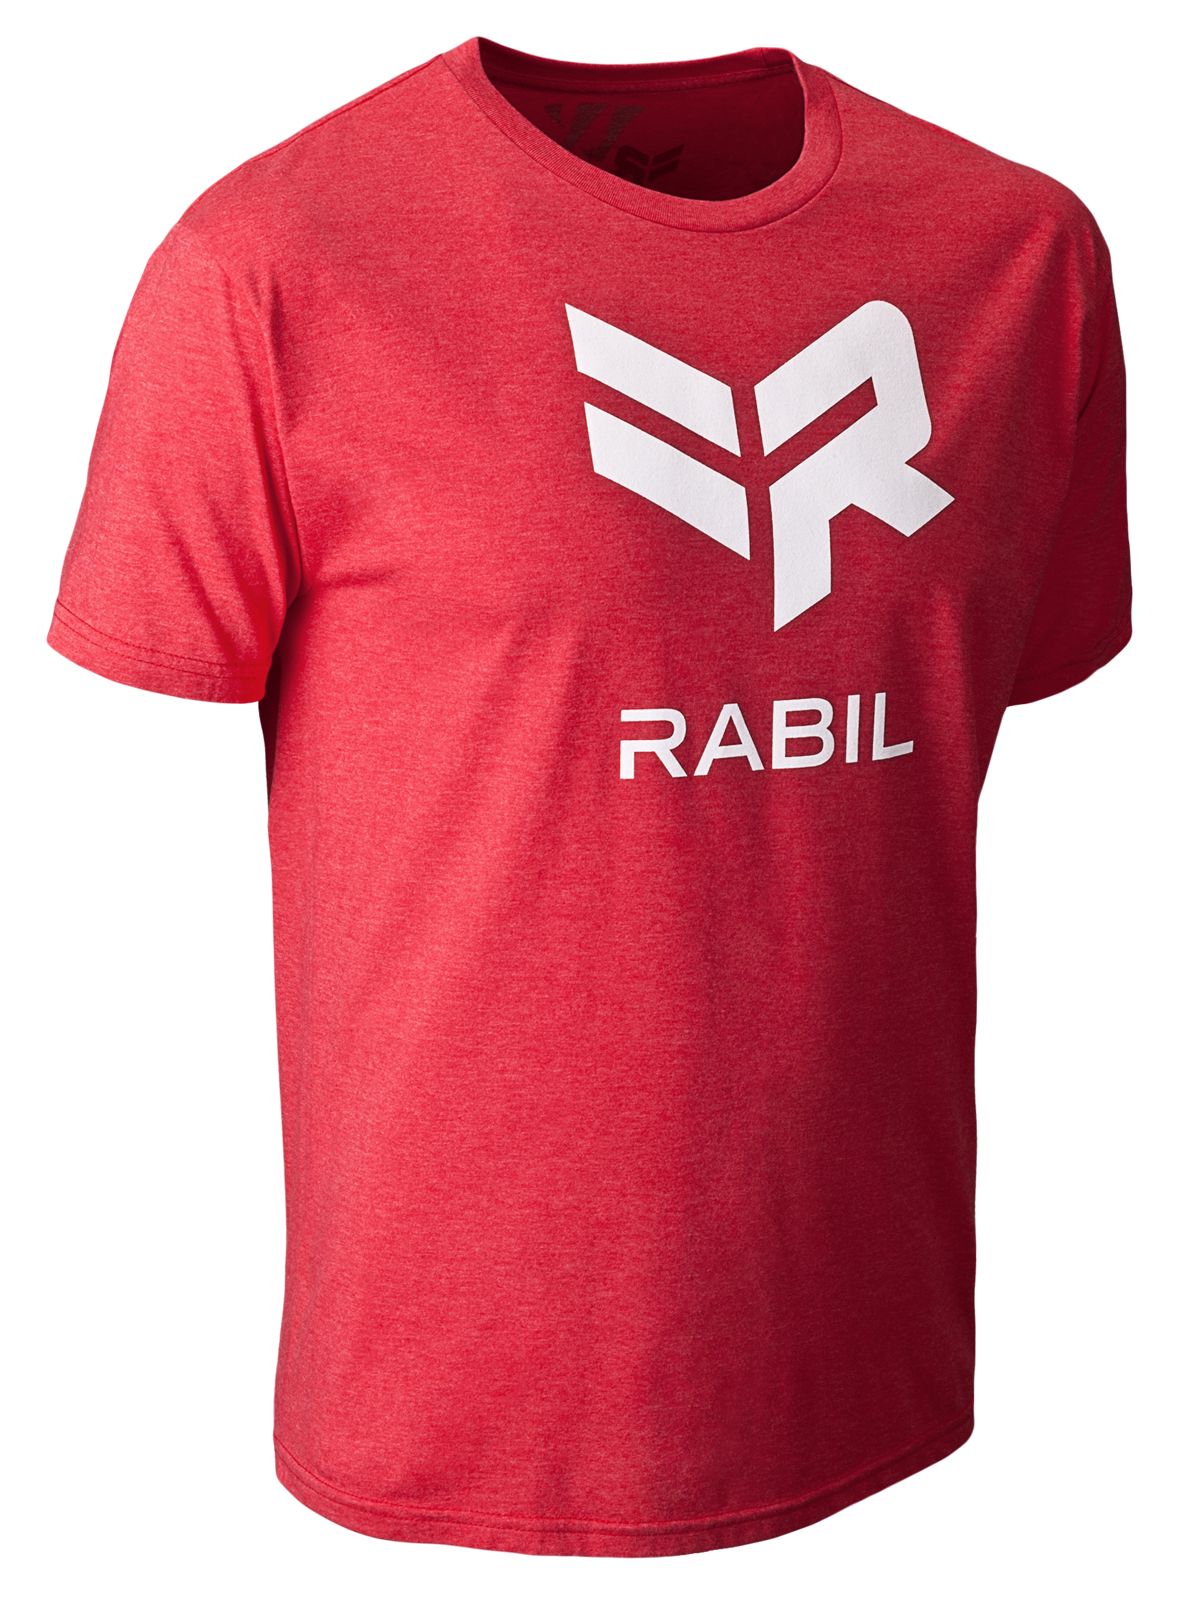 Rabil Logo Tee, Red image number 3